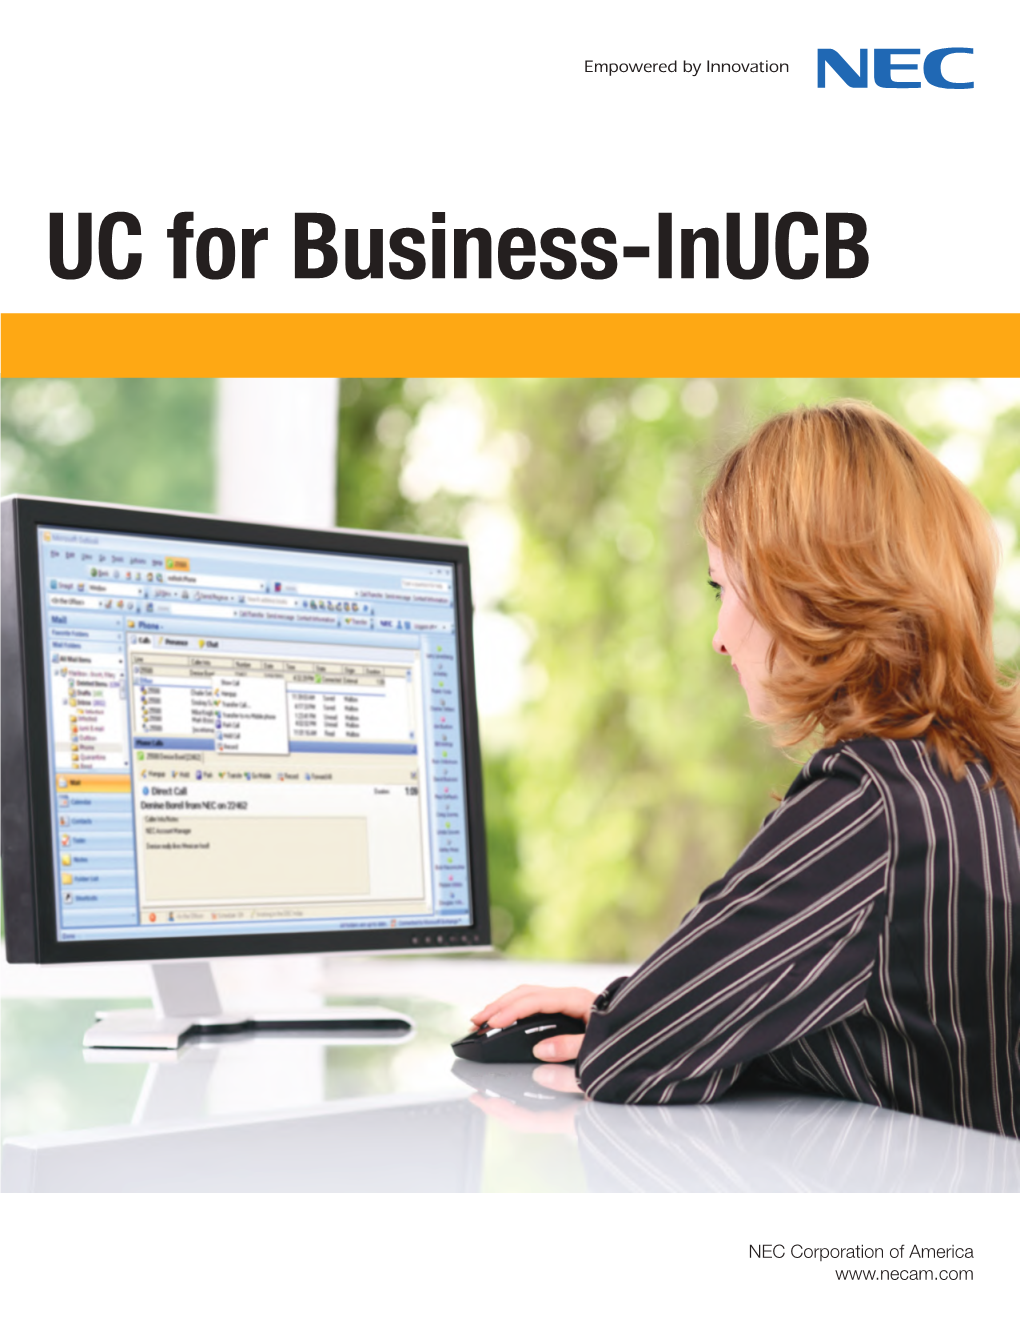 UC for Business-Inucb